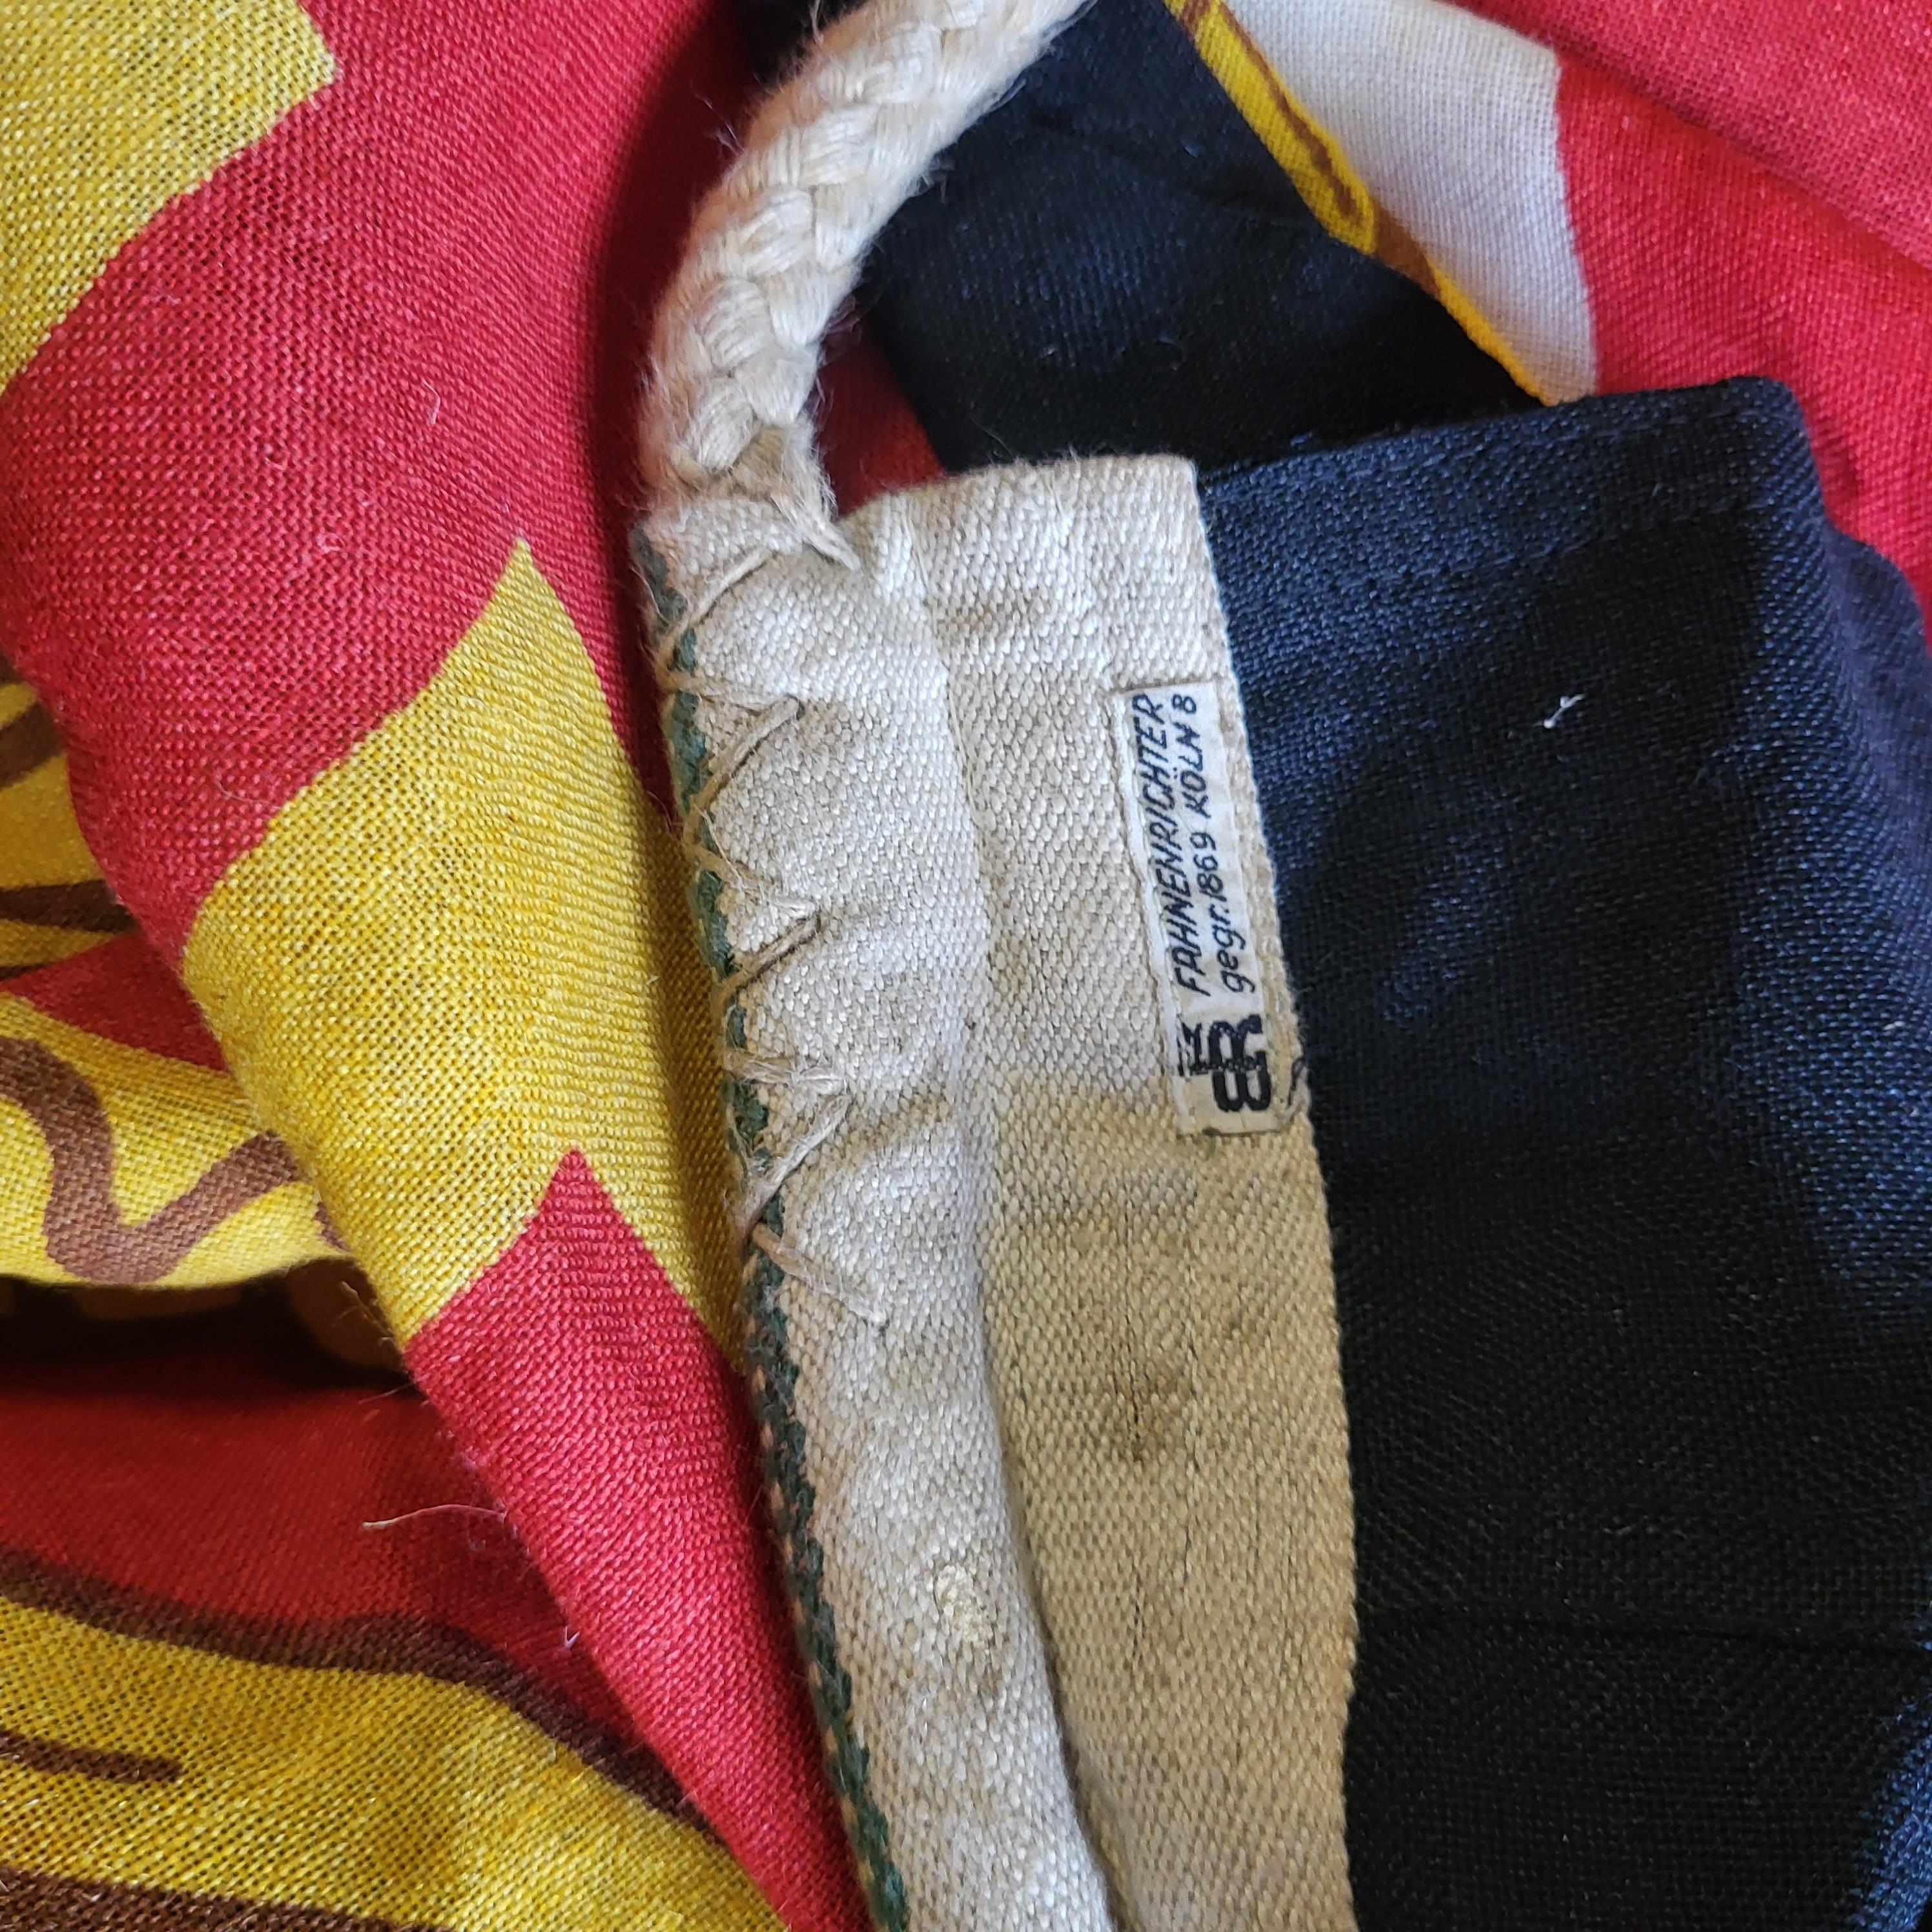 A LARGE ORIGINAL GERMAN FUHRER STANDARTE IV FLAG Bearing printed letters and insignia to spine, - Image 2 of 3